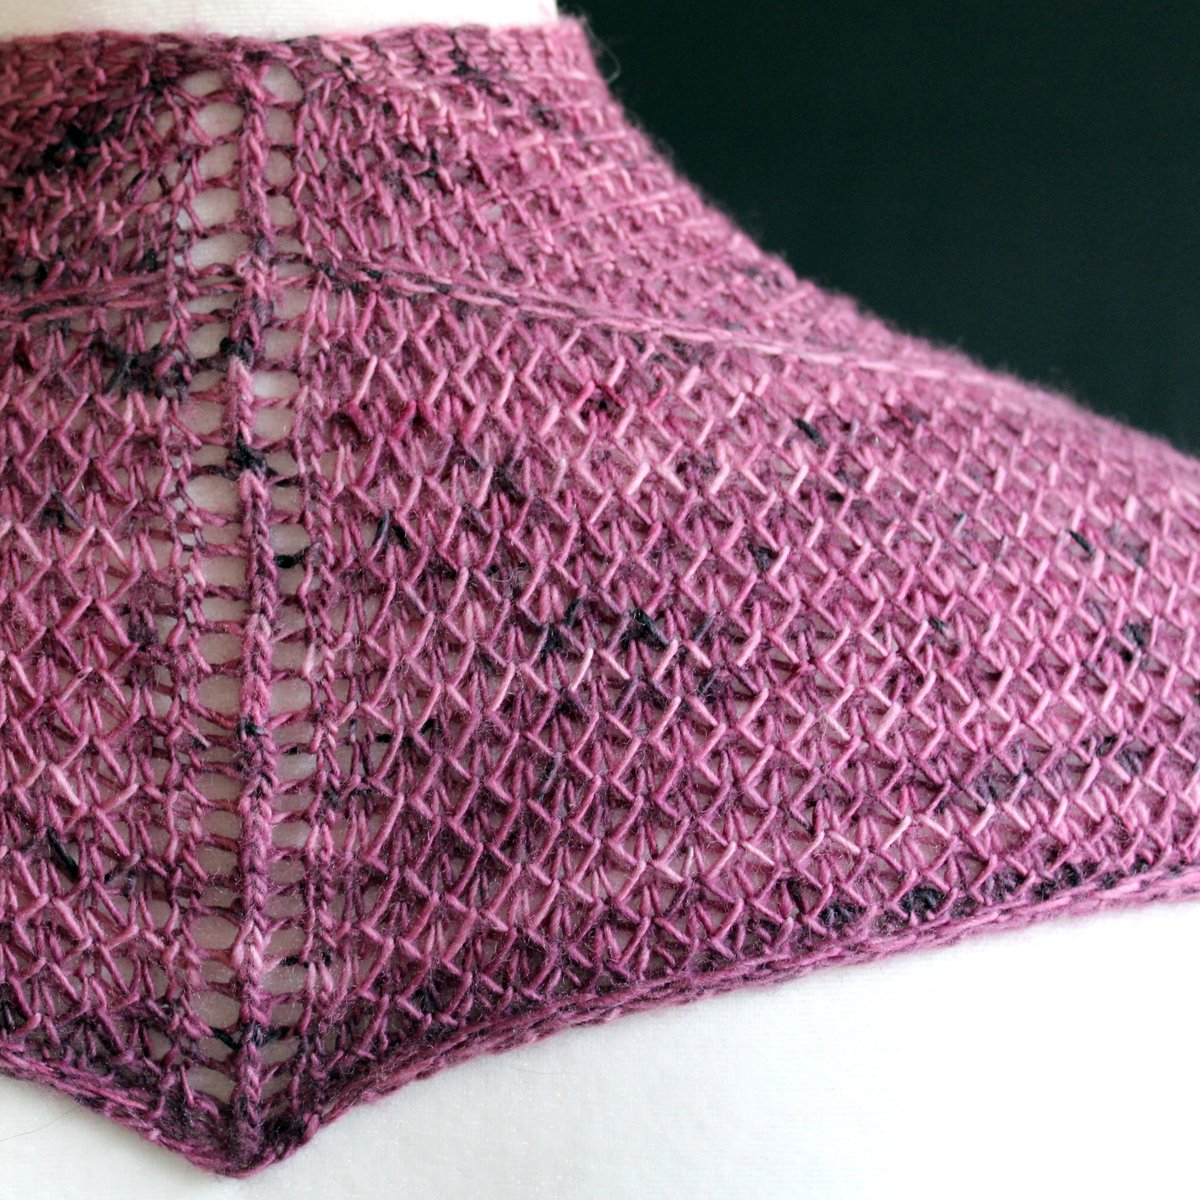 Here's the back of the cowlette. I love how this angle shows all the gorgeous details!

x.com/LizCorke/statu…

#TheFibreFoxYarns #RoilleCowl #LizCorkeKnits